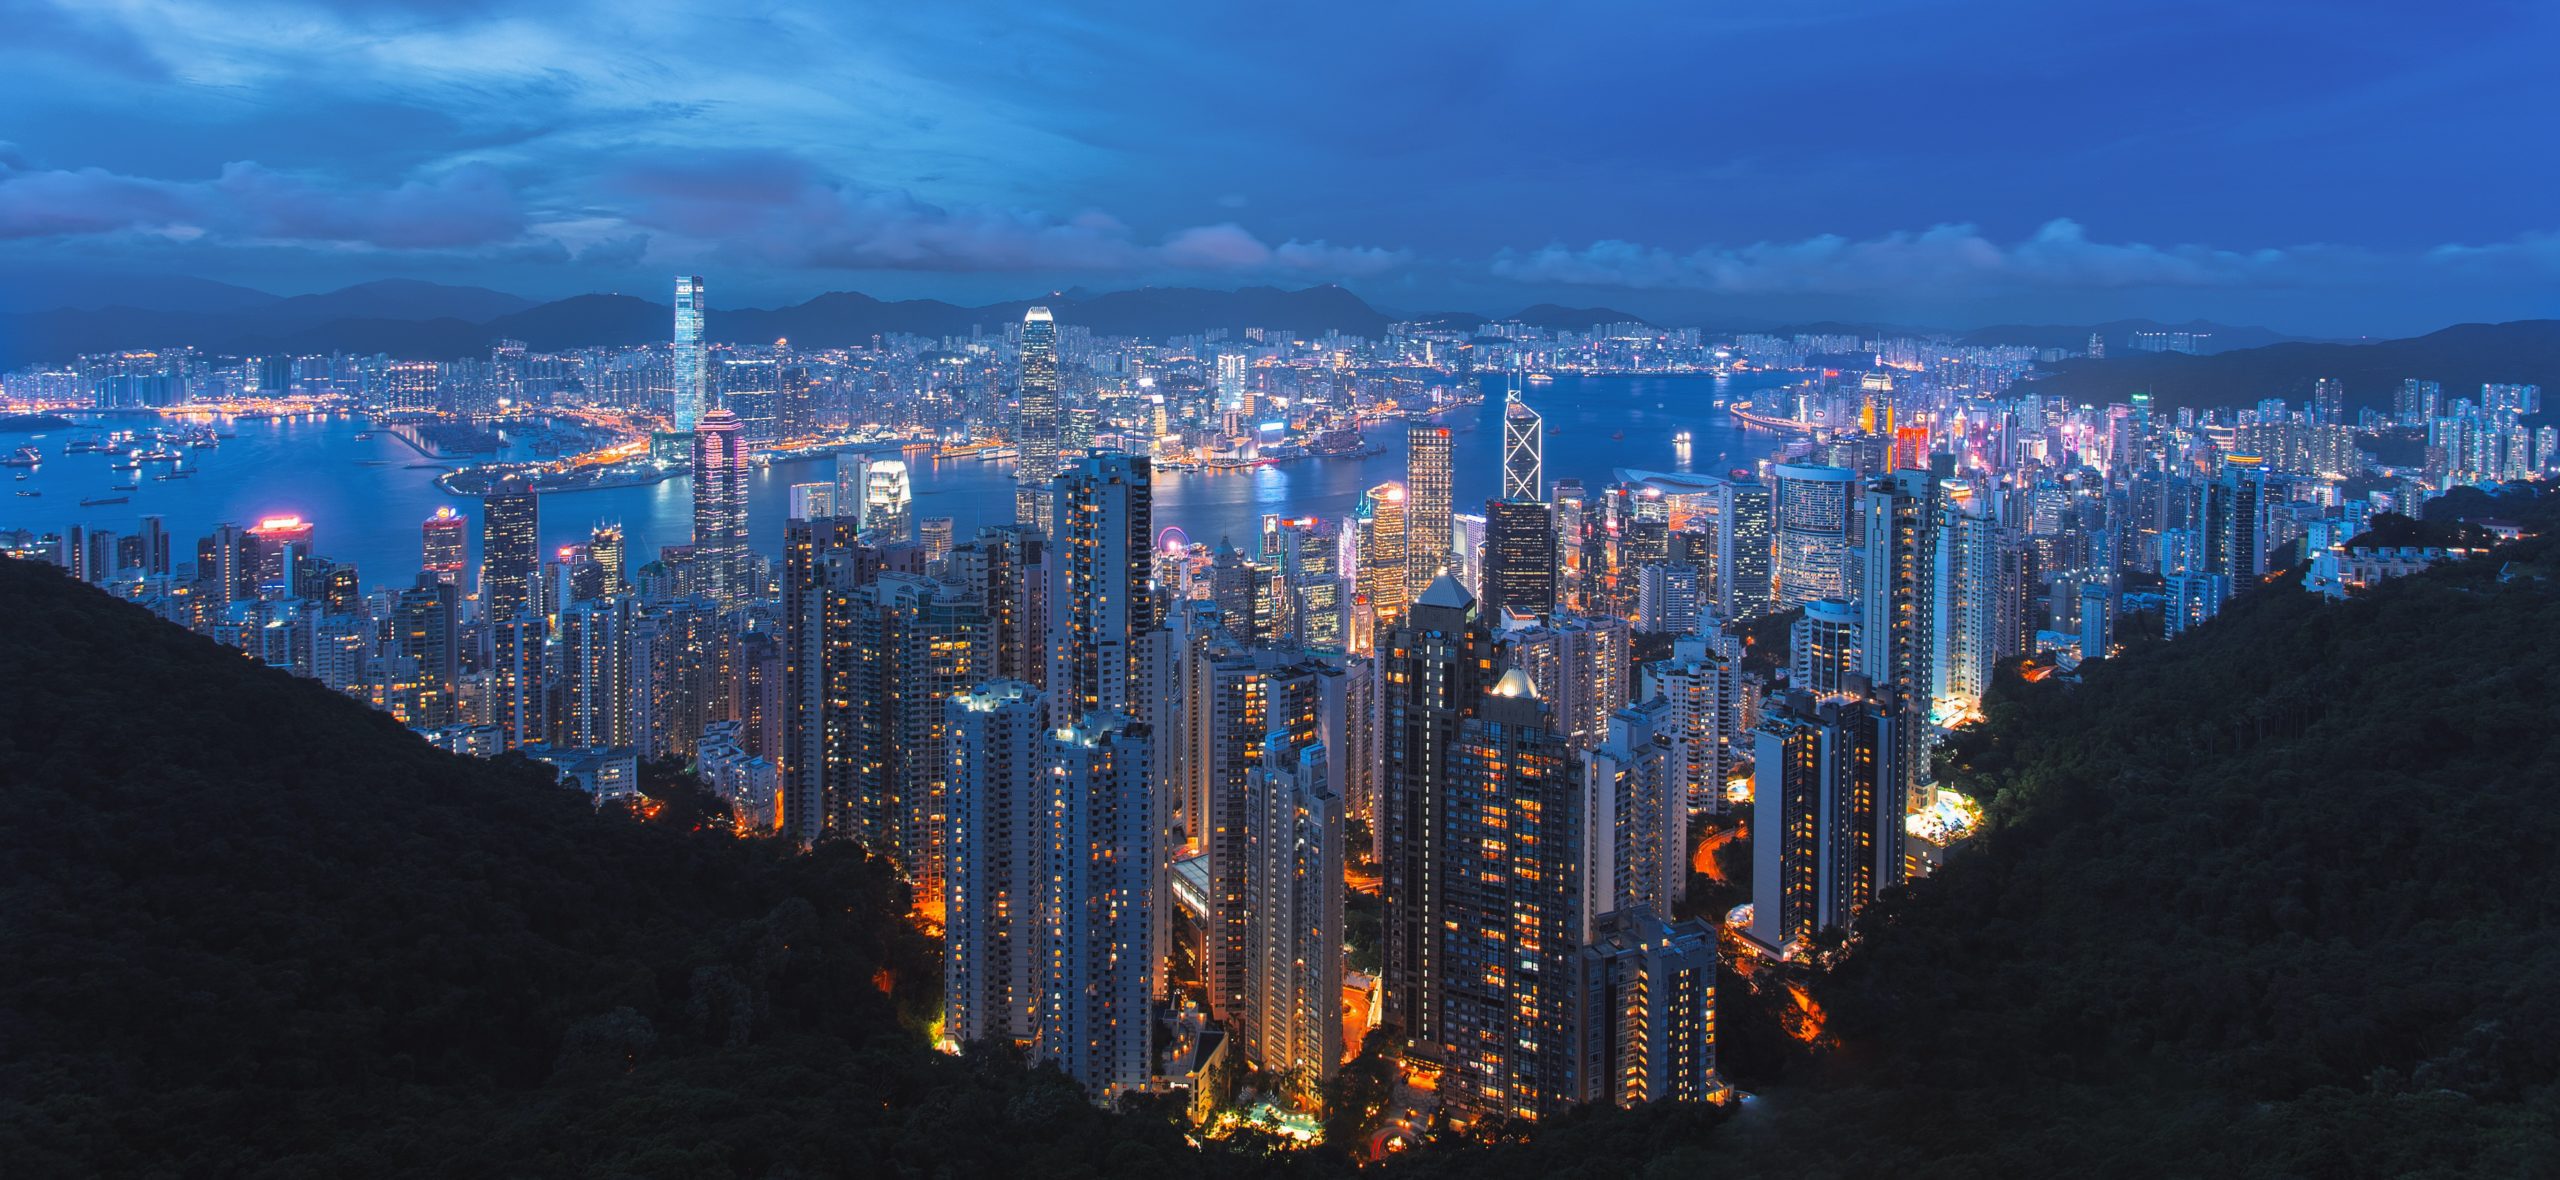 Best and Worst Things About Living in Hong Kong, According to a Local